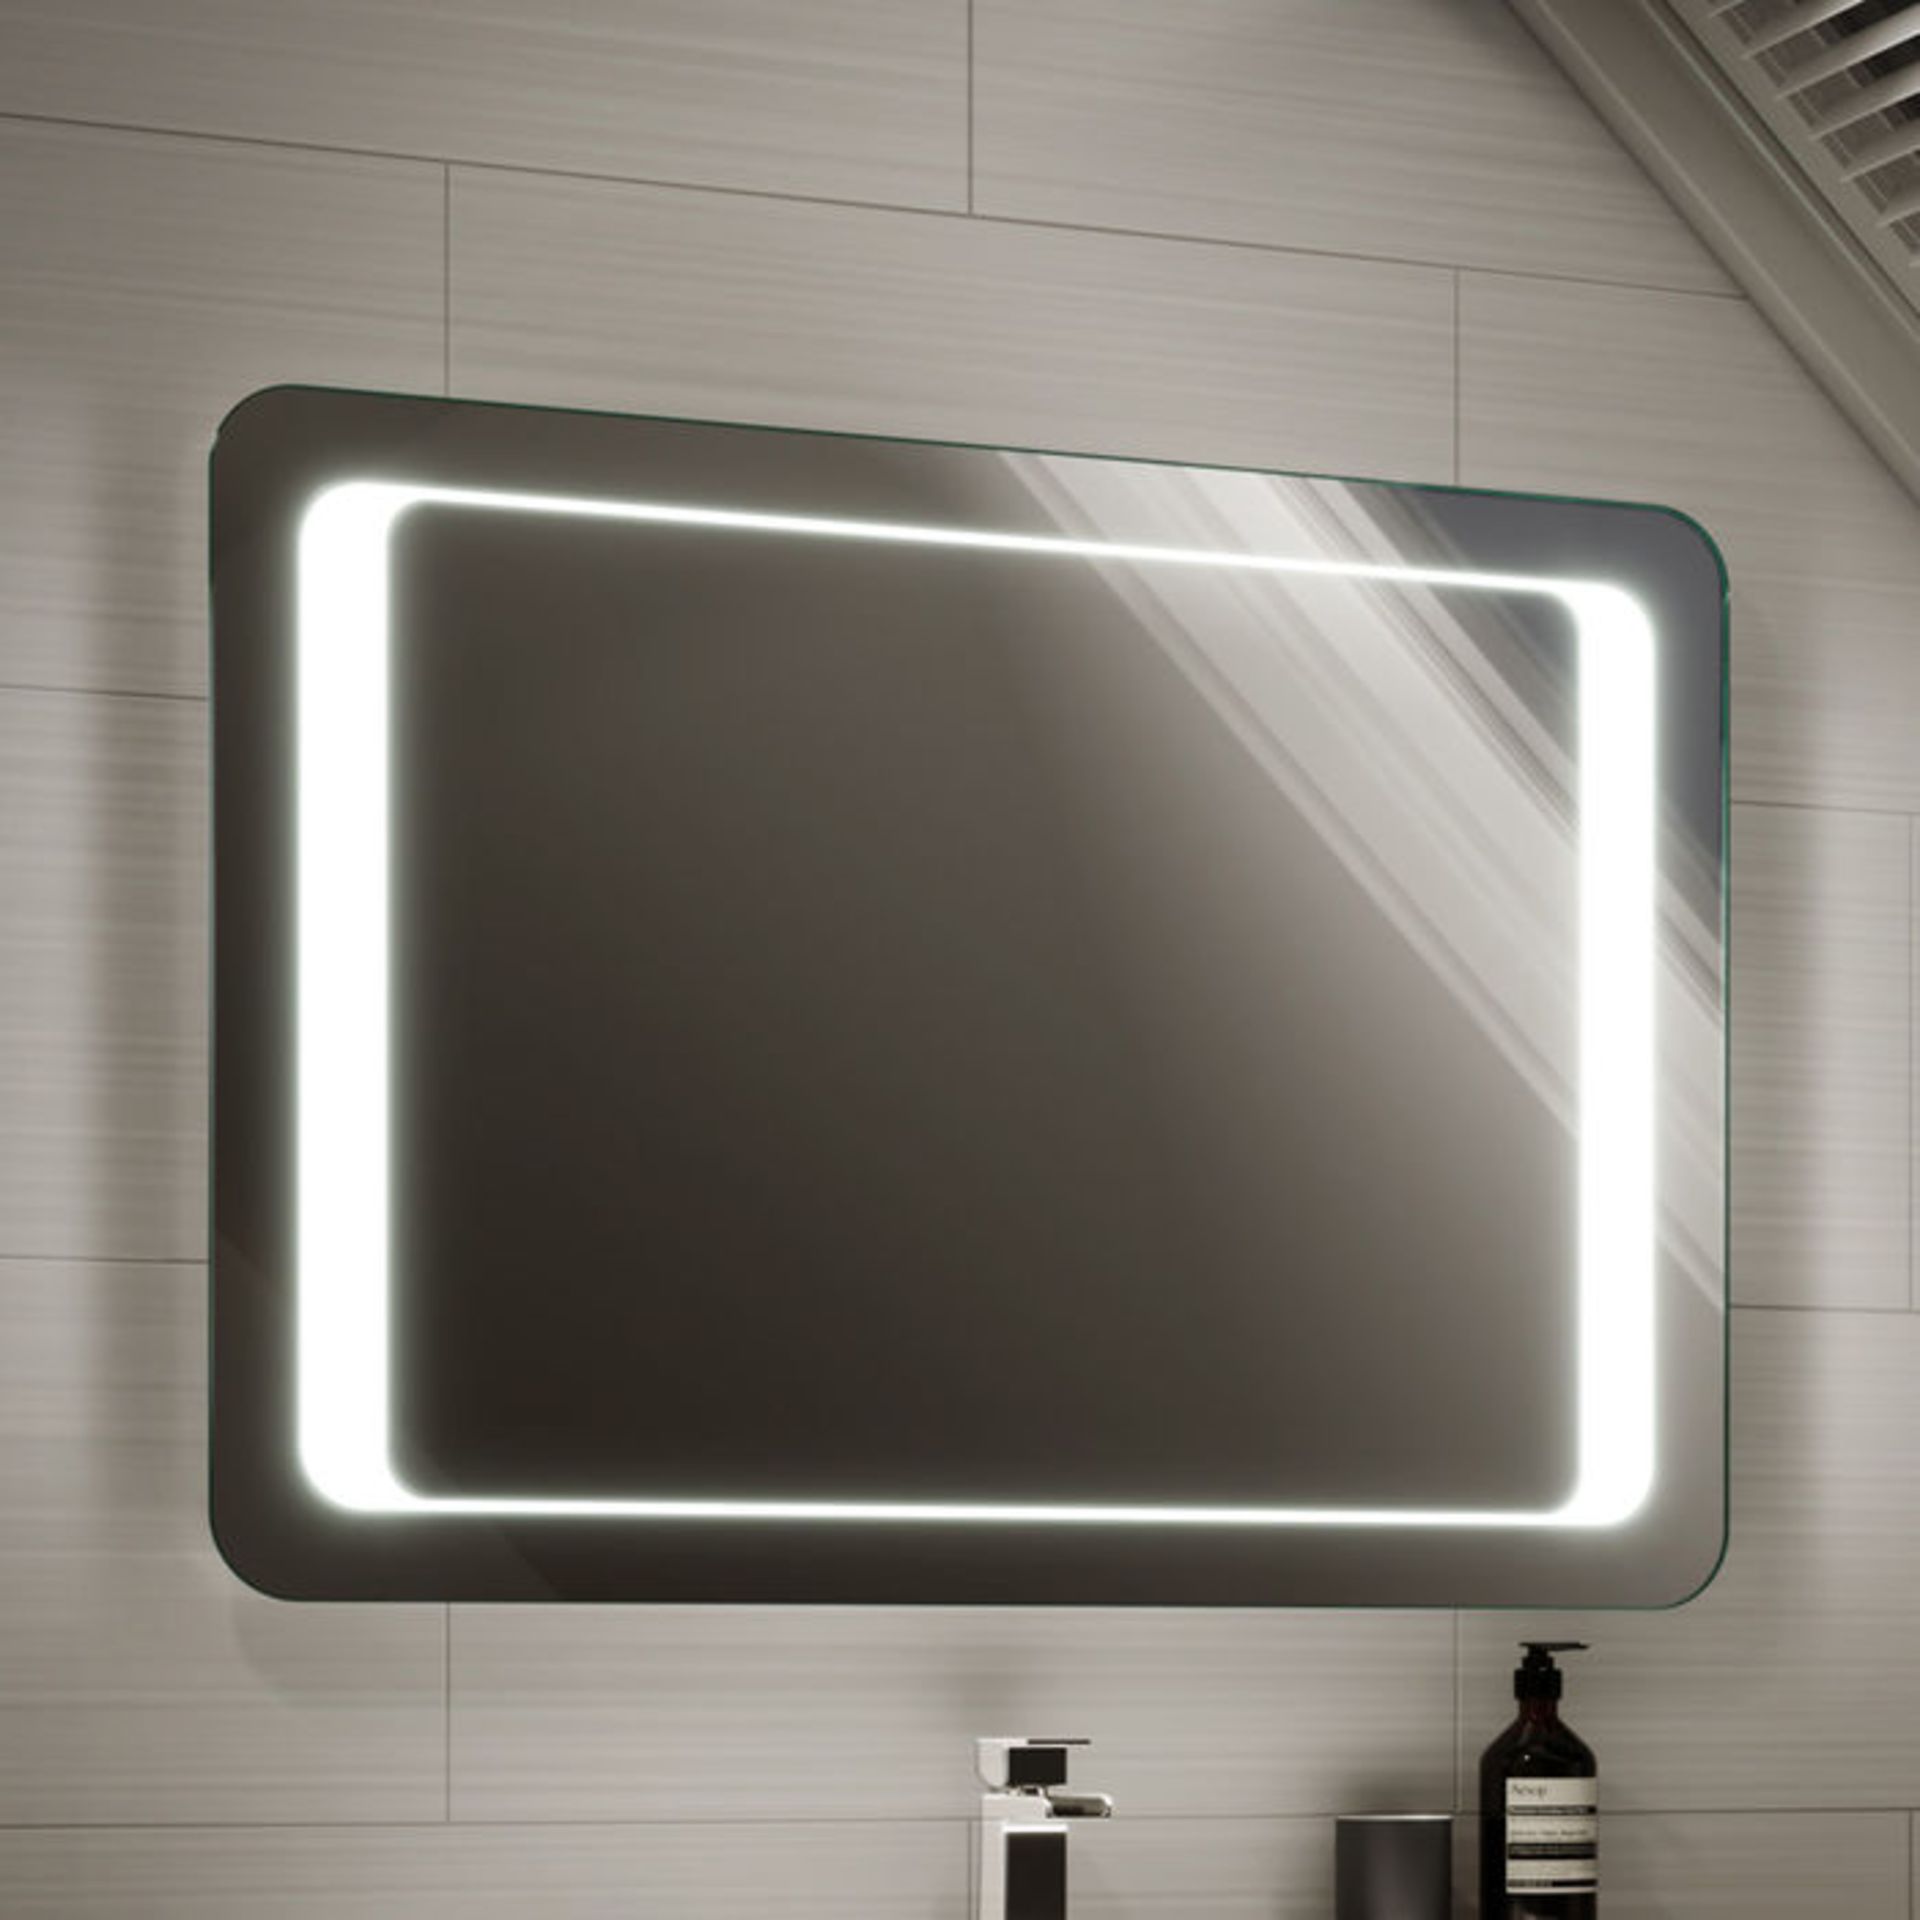 (LP173) 650x900mm Quasar Illuminated LED Mirror. RRP £349.99. Energy efficient LED lighting with - Image 4 of 5